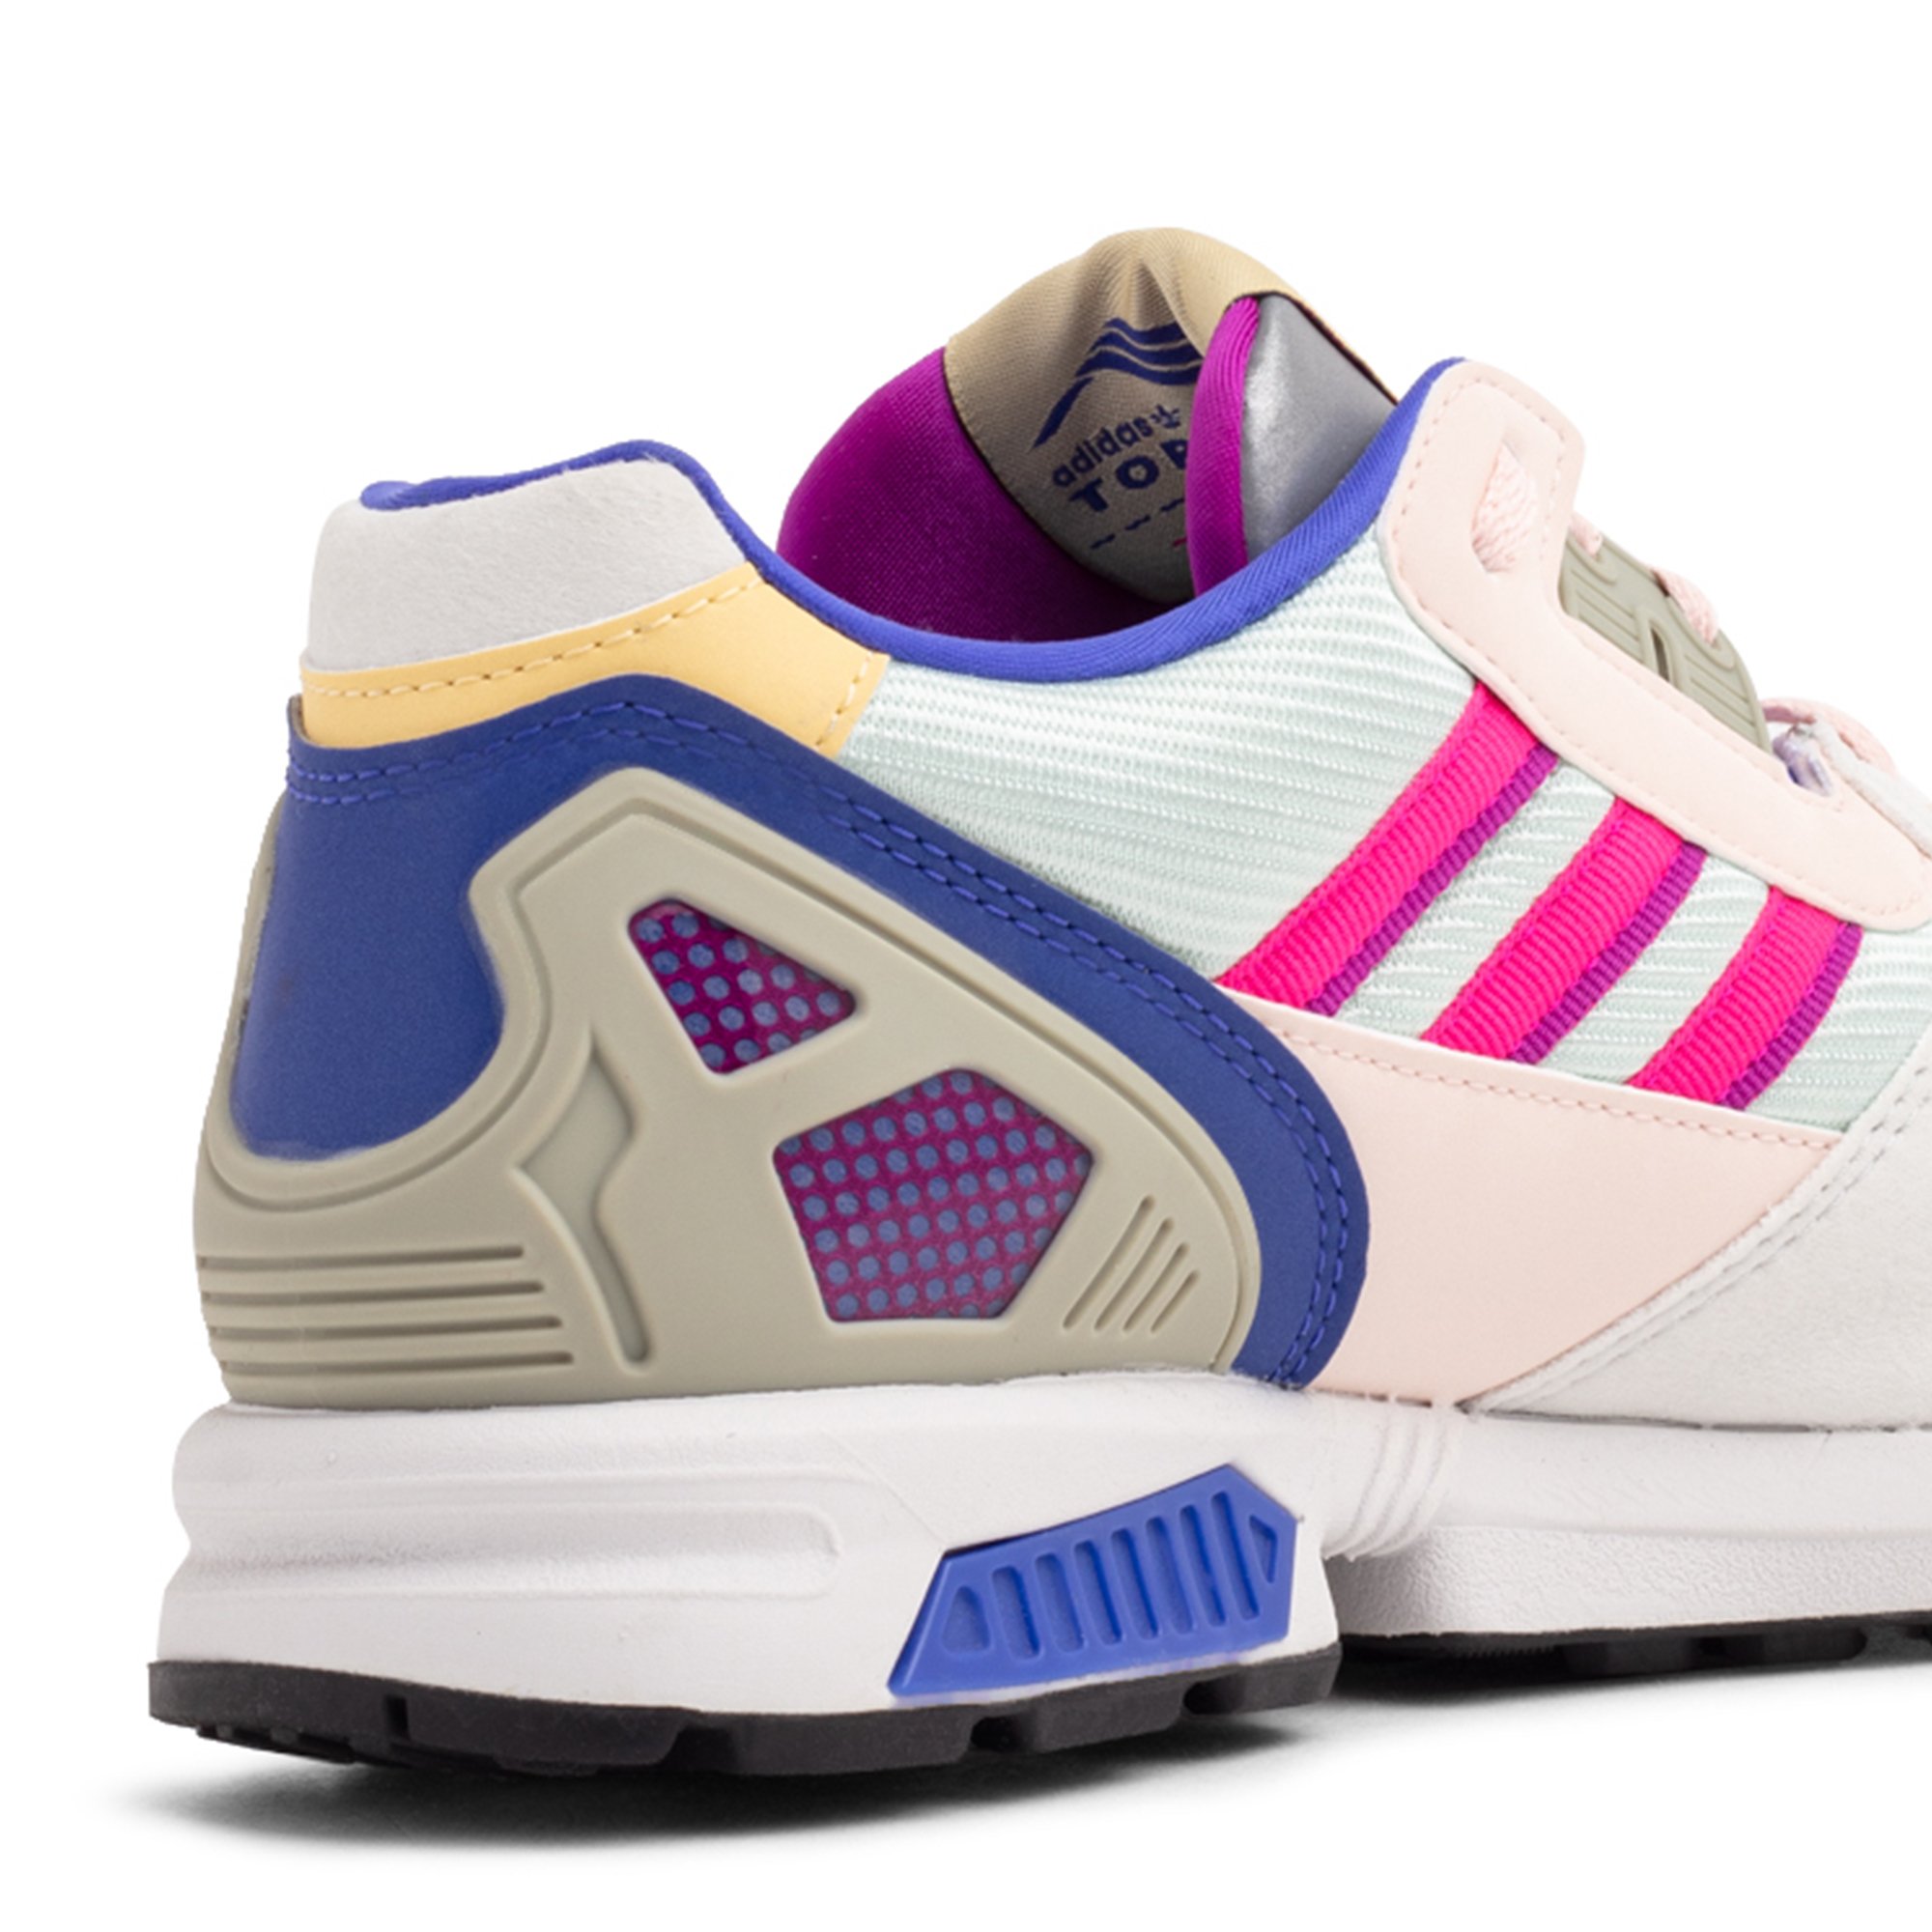 Adidas ZX 8000 sneakers for Women - White in UAE | Level Shoes